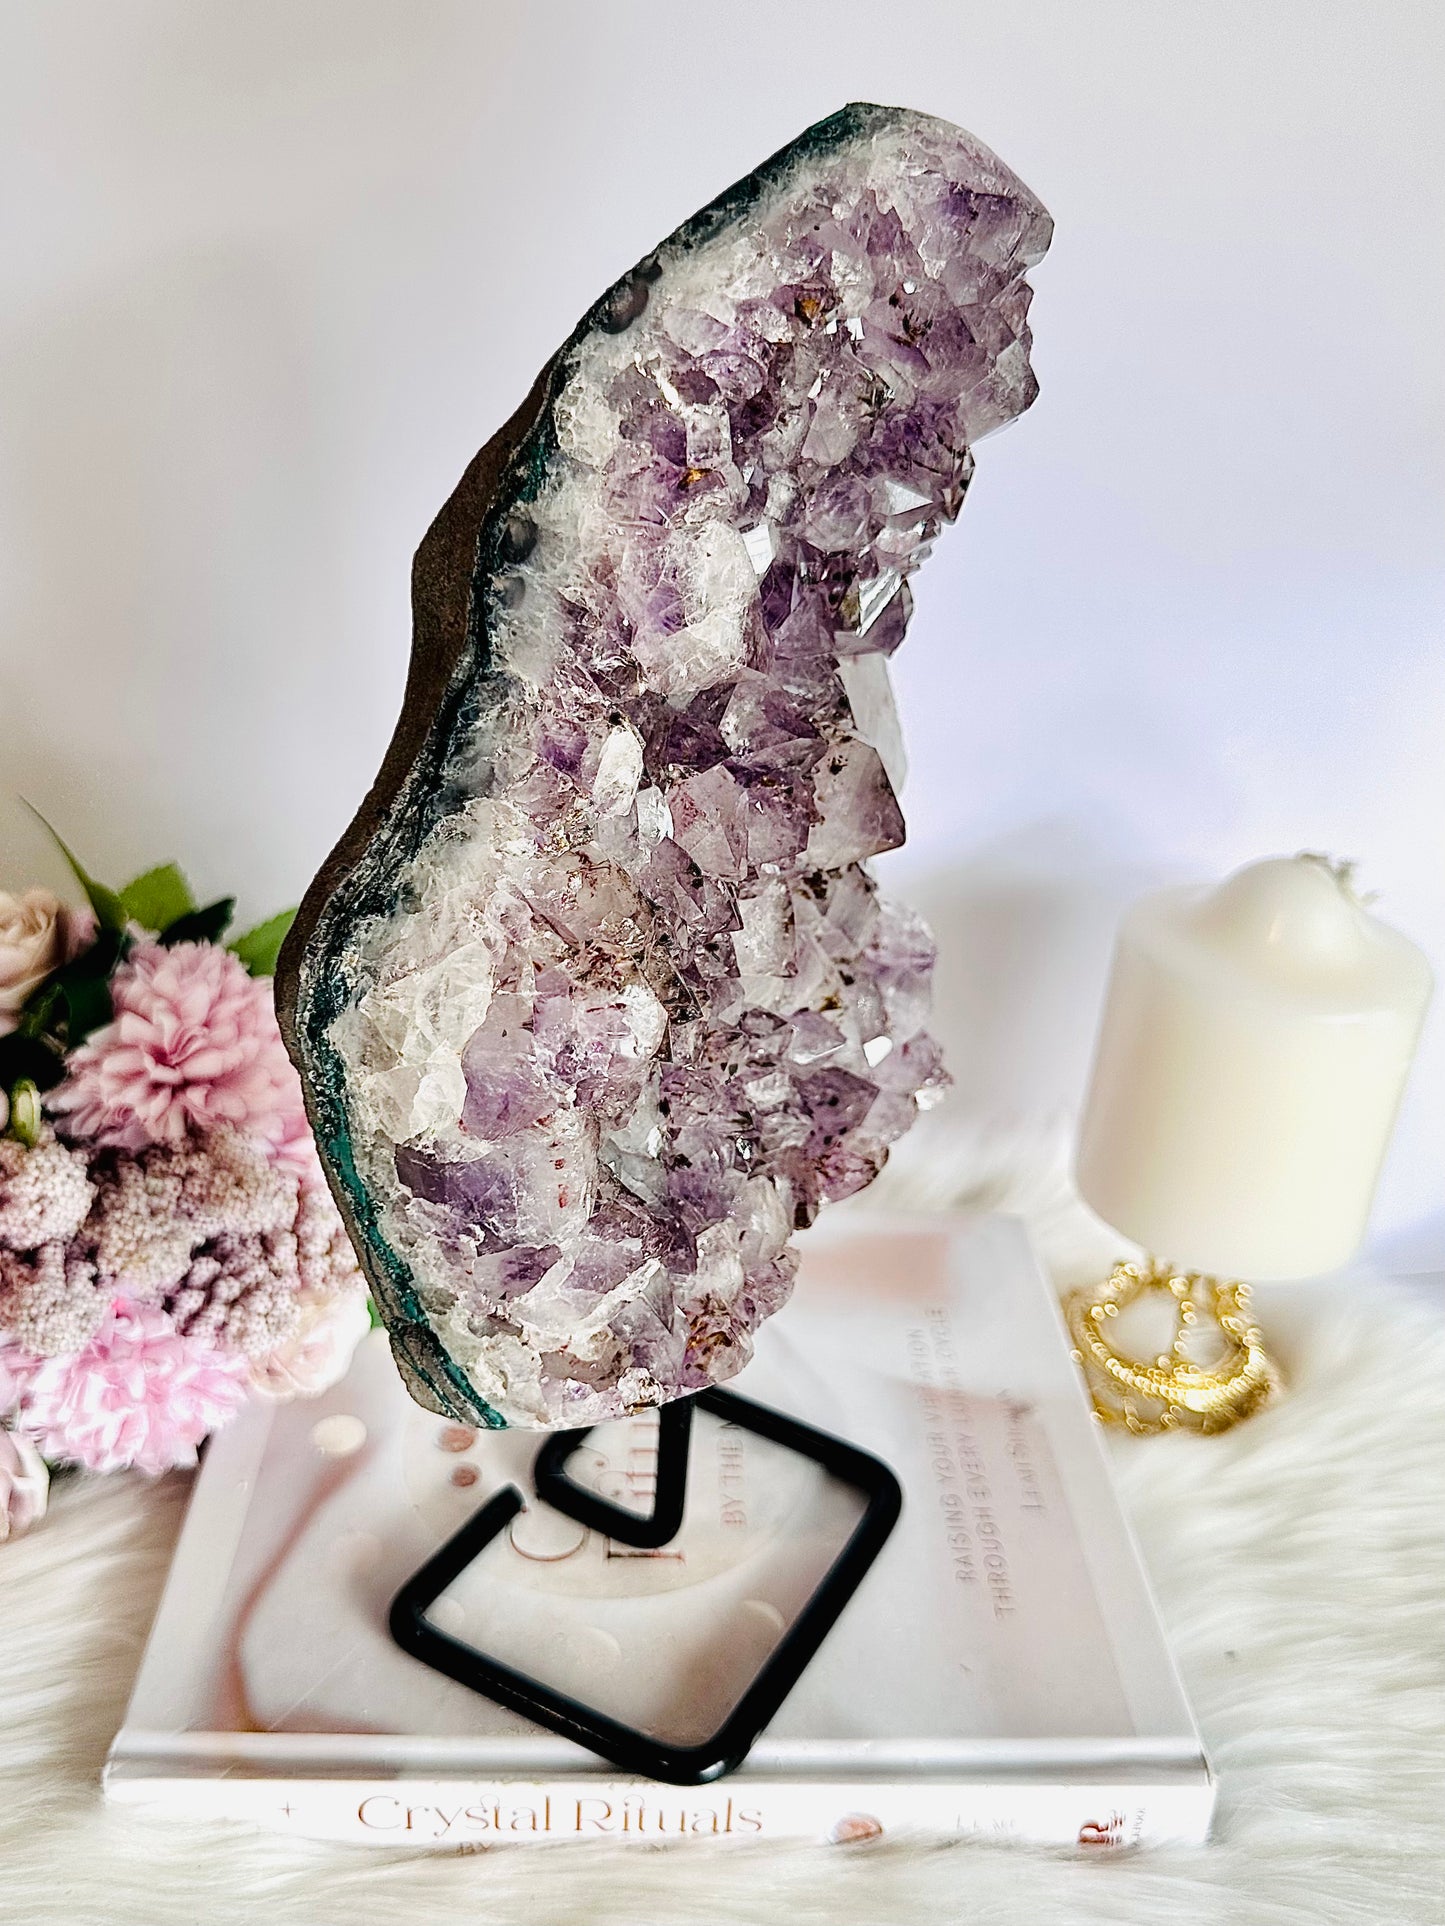 Wow!!!! Incredible Large 30cm 2.29KG Amethyst Druzy Cluster On Stand From Brazil ~ A Stunning Piece